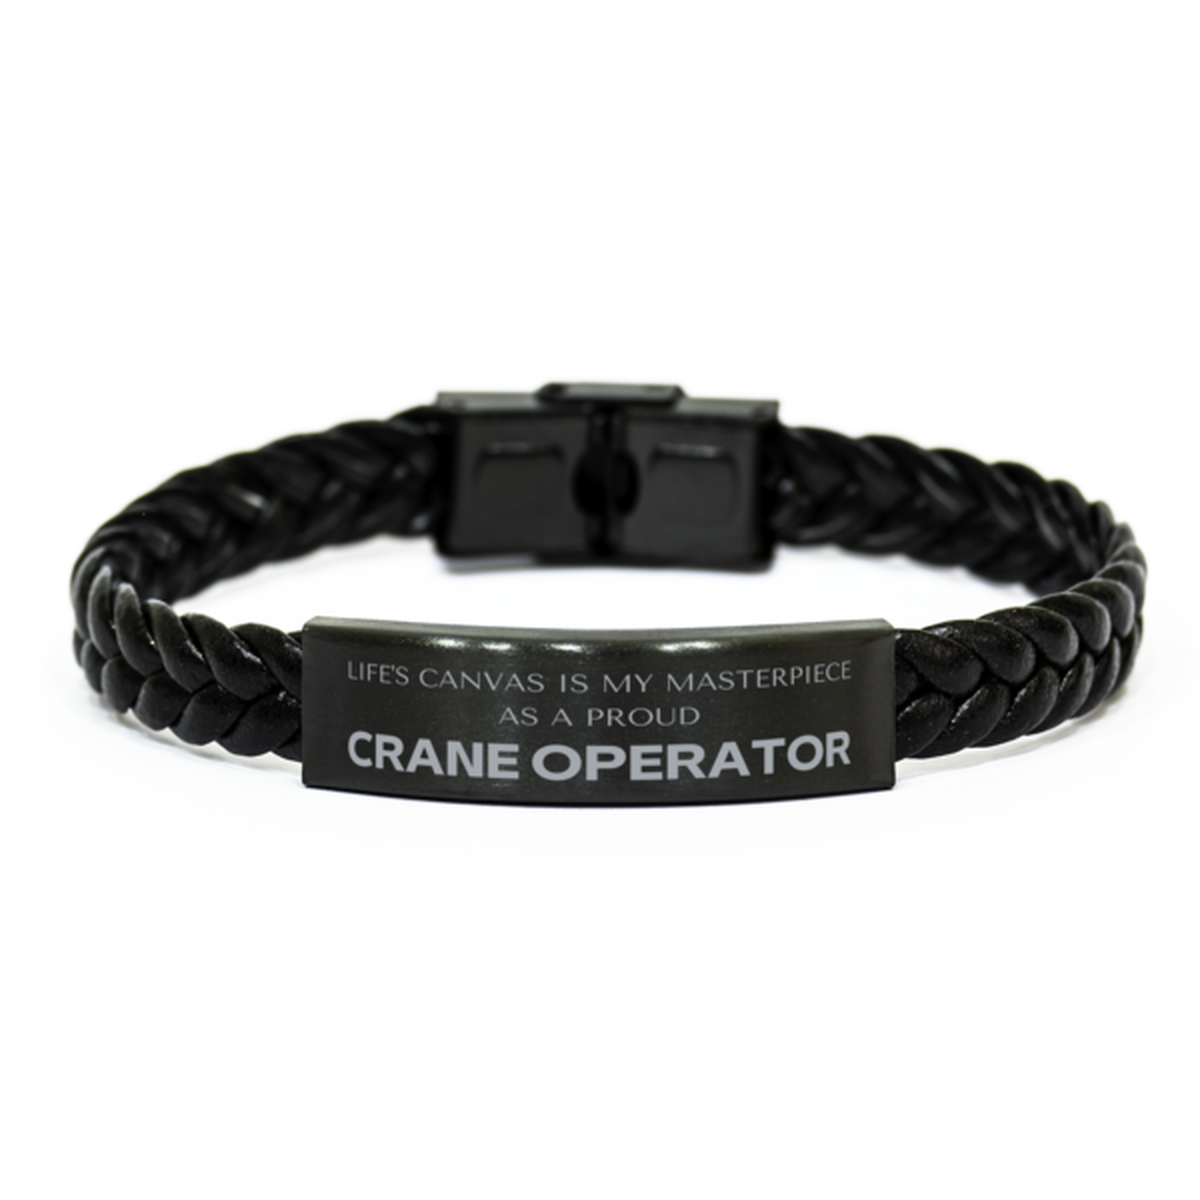 Proud Crane Operator Gifts, Life's canvas is my masterpiece, Epic Birthday Christmas Unique Braided Leather Bracelet For Crane Operator, Coworkers, Men, Women, Friends